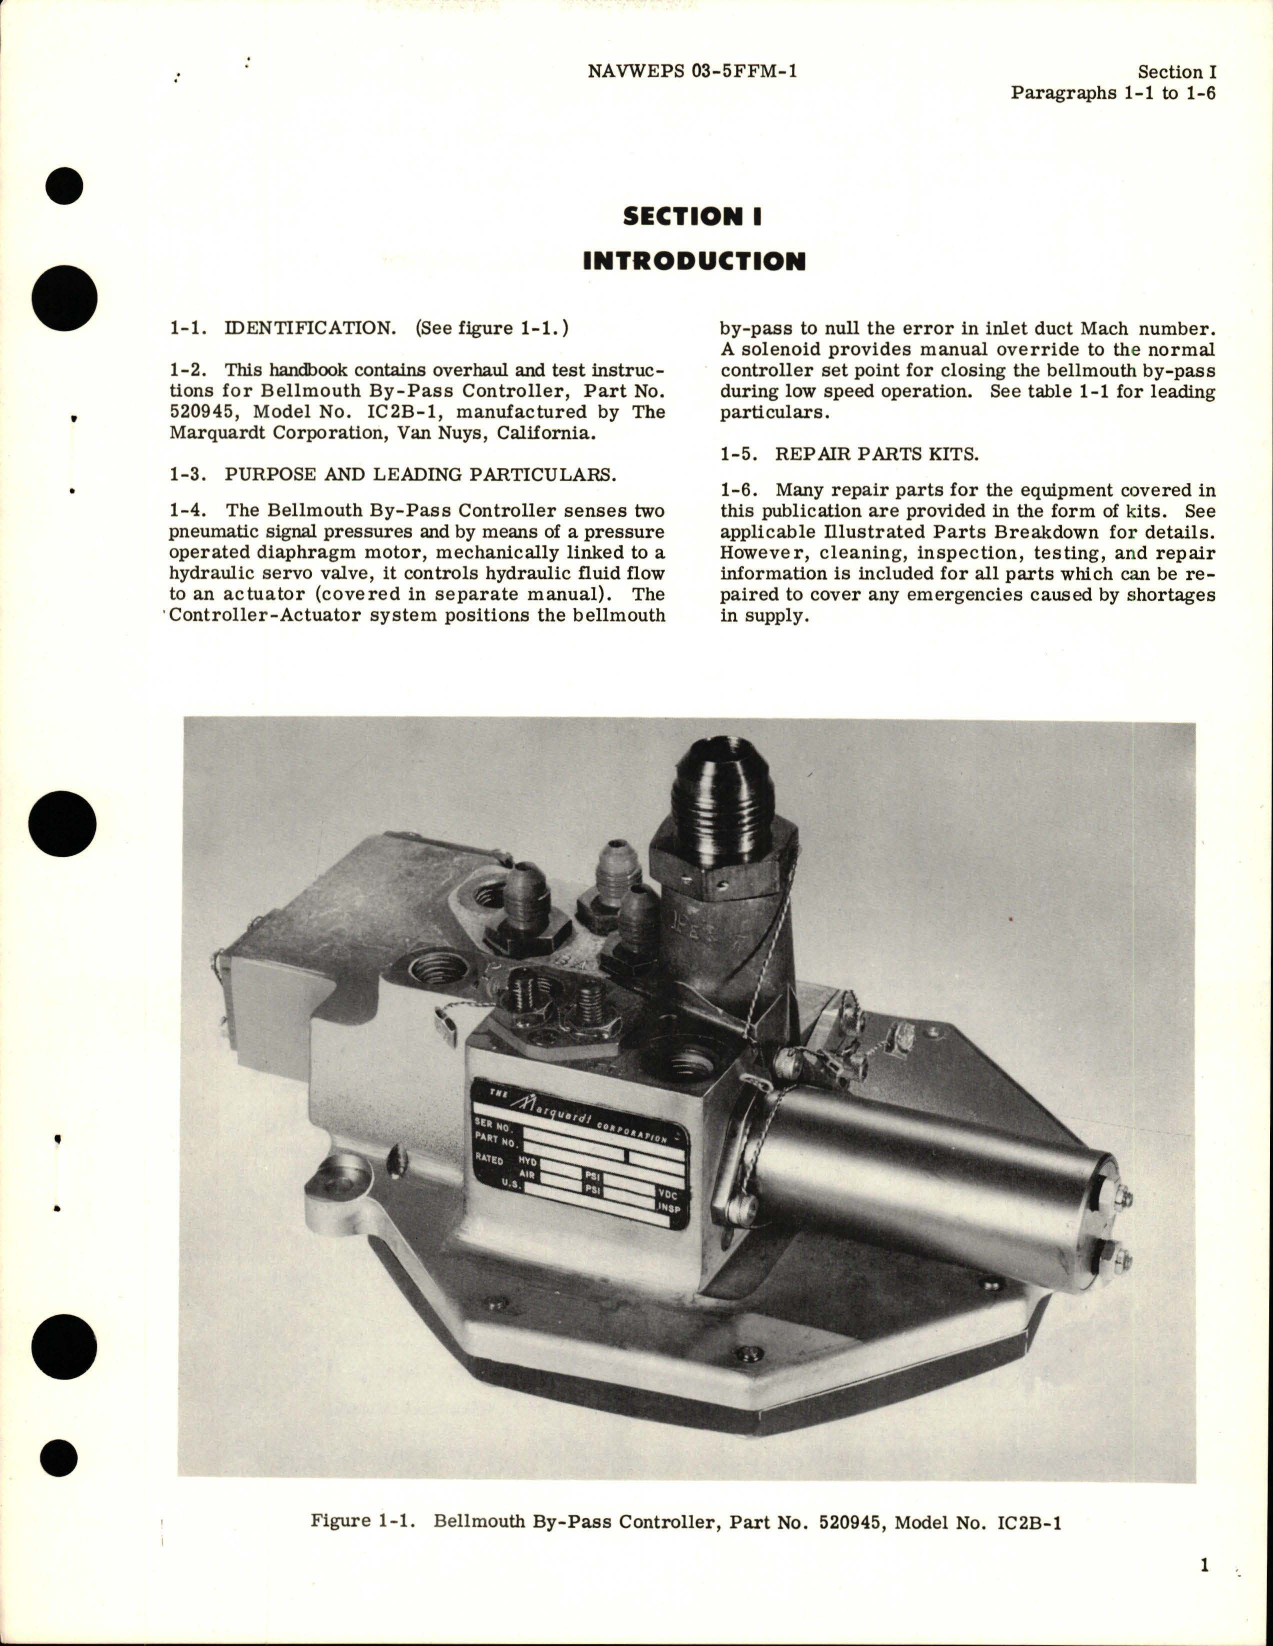 Sample page 5 from AirCorps Library document: Overhaul Instructions for By-Pass Controller - Models IC2B-1, IC2B-1A, and IC2B-1B - Part 520945